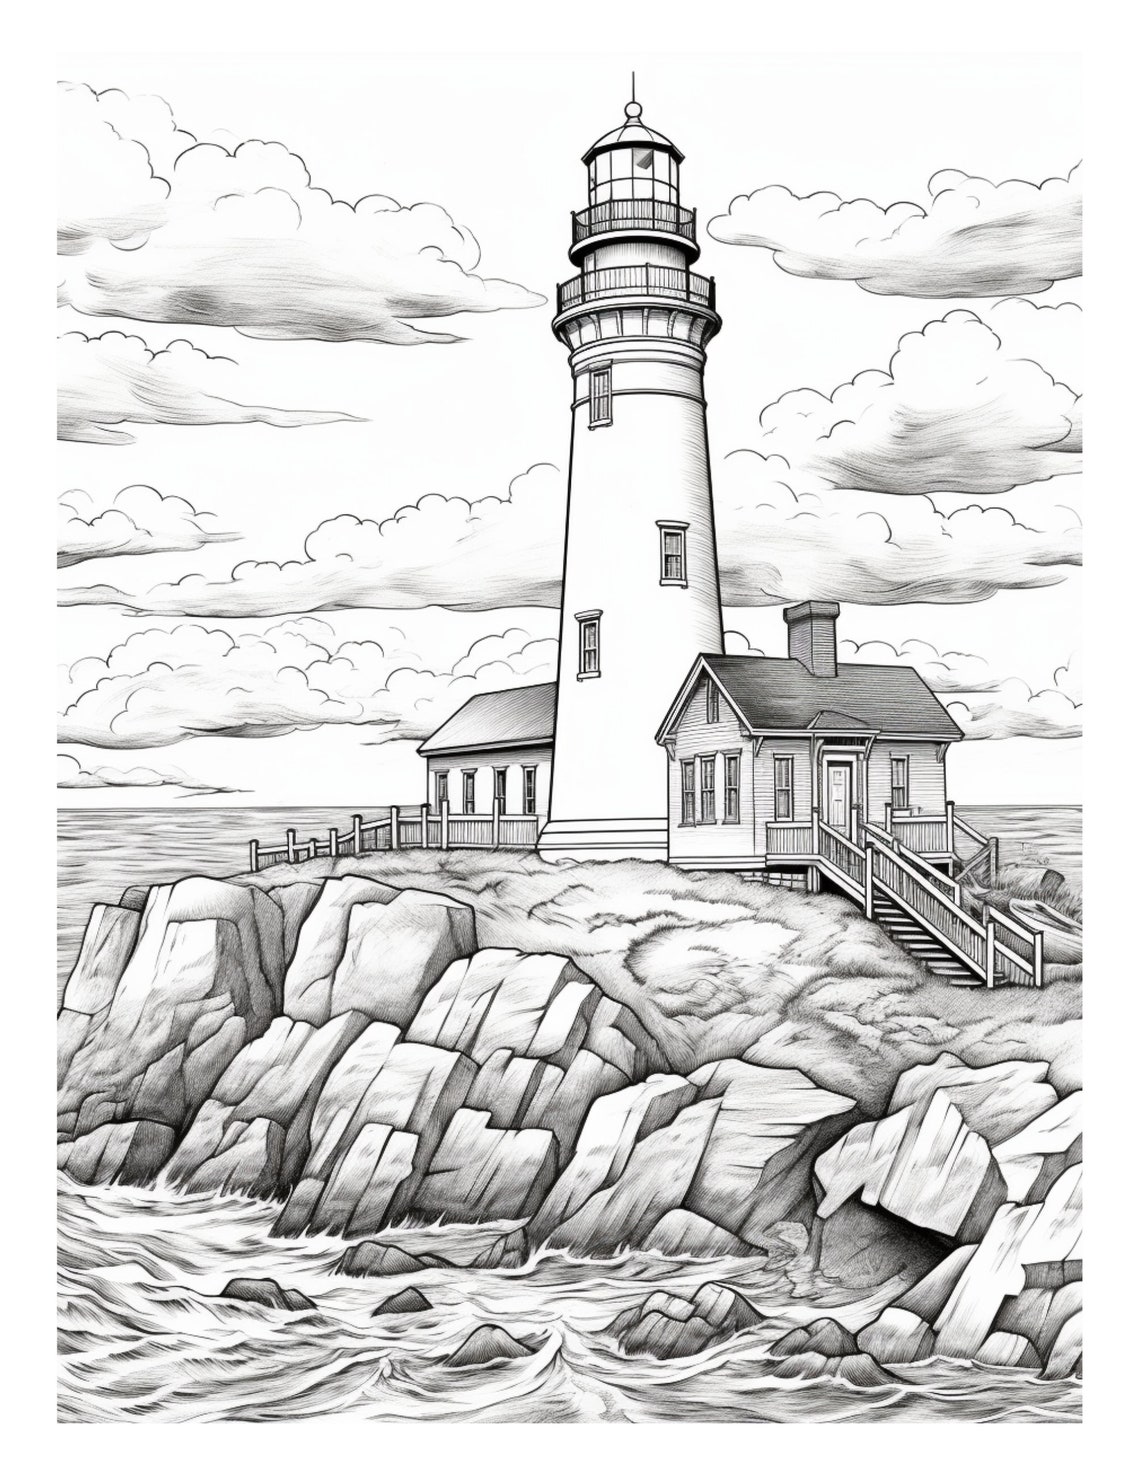 Adult Coloring Pages 10 Intricate Serene Landscapes - Etsy